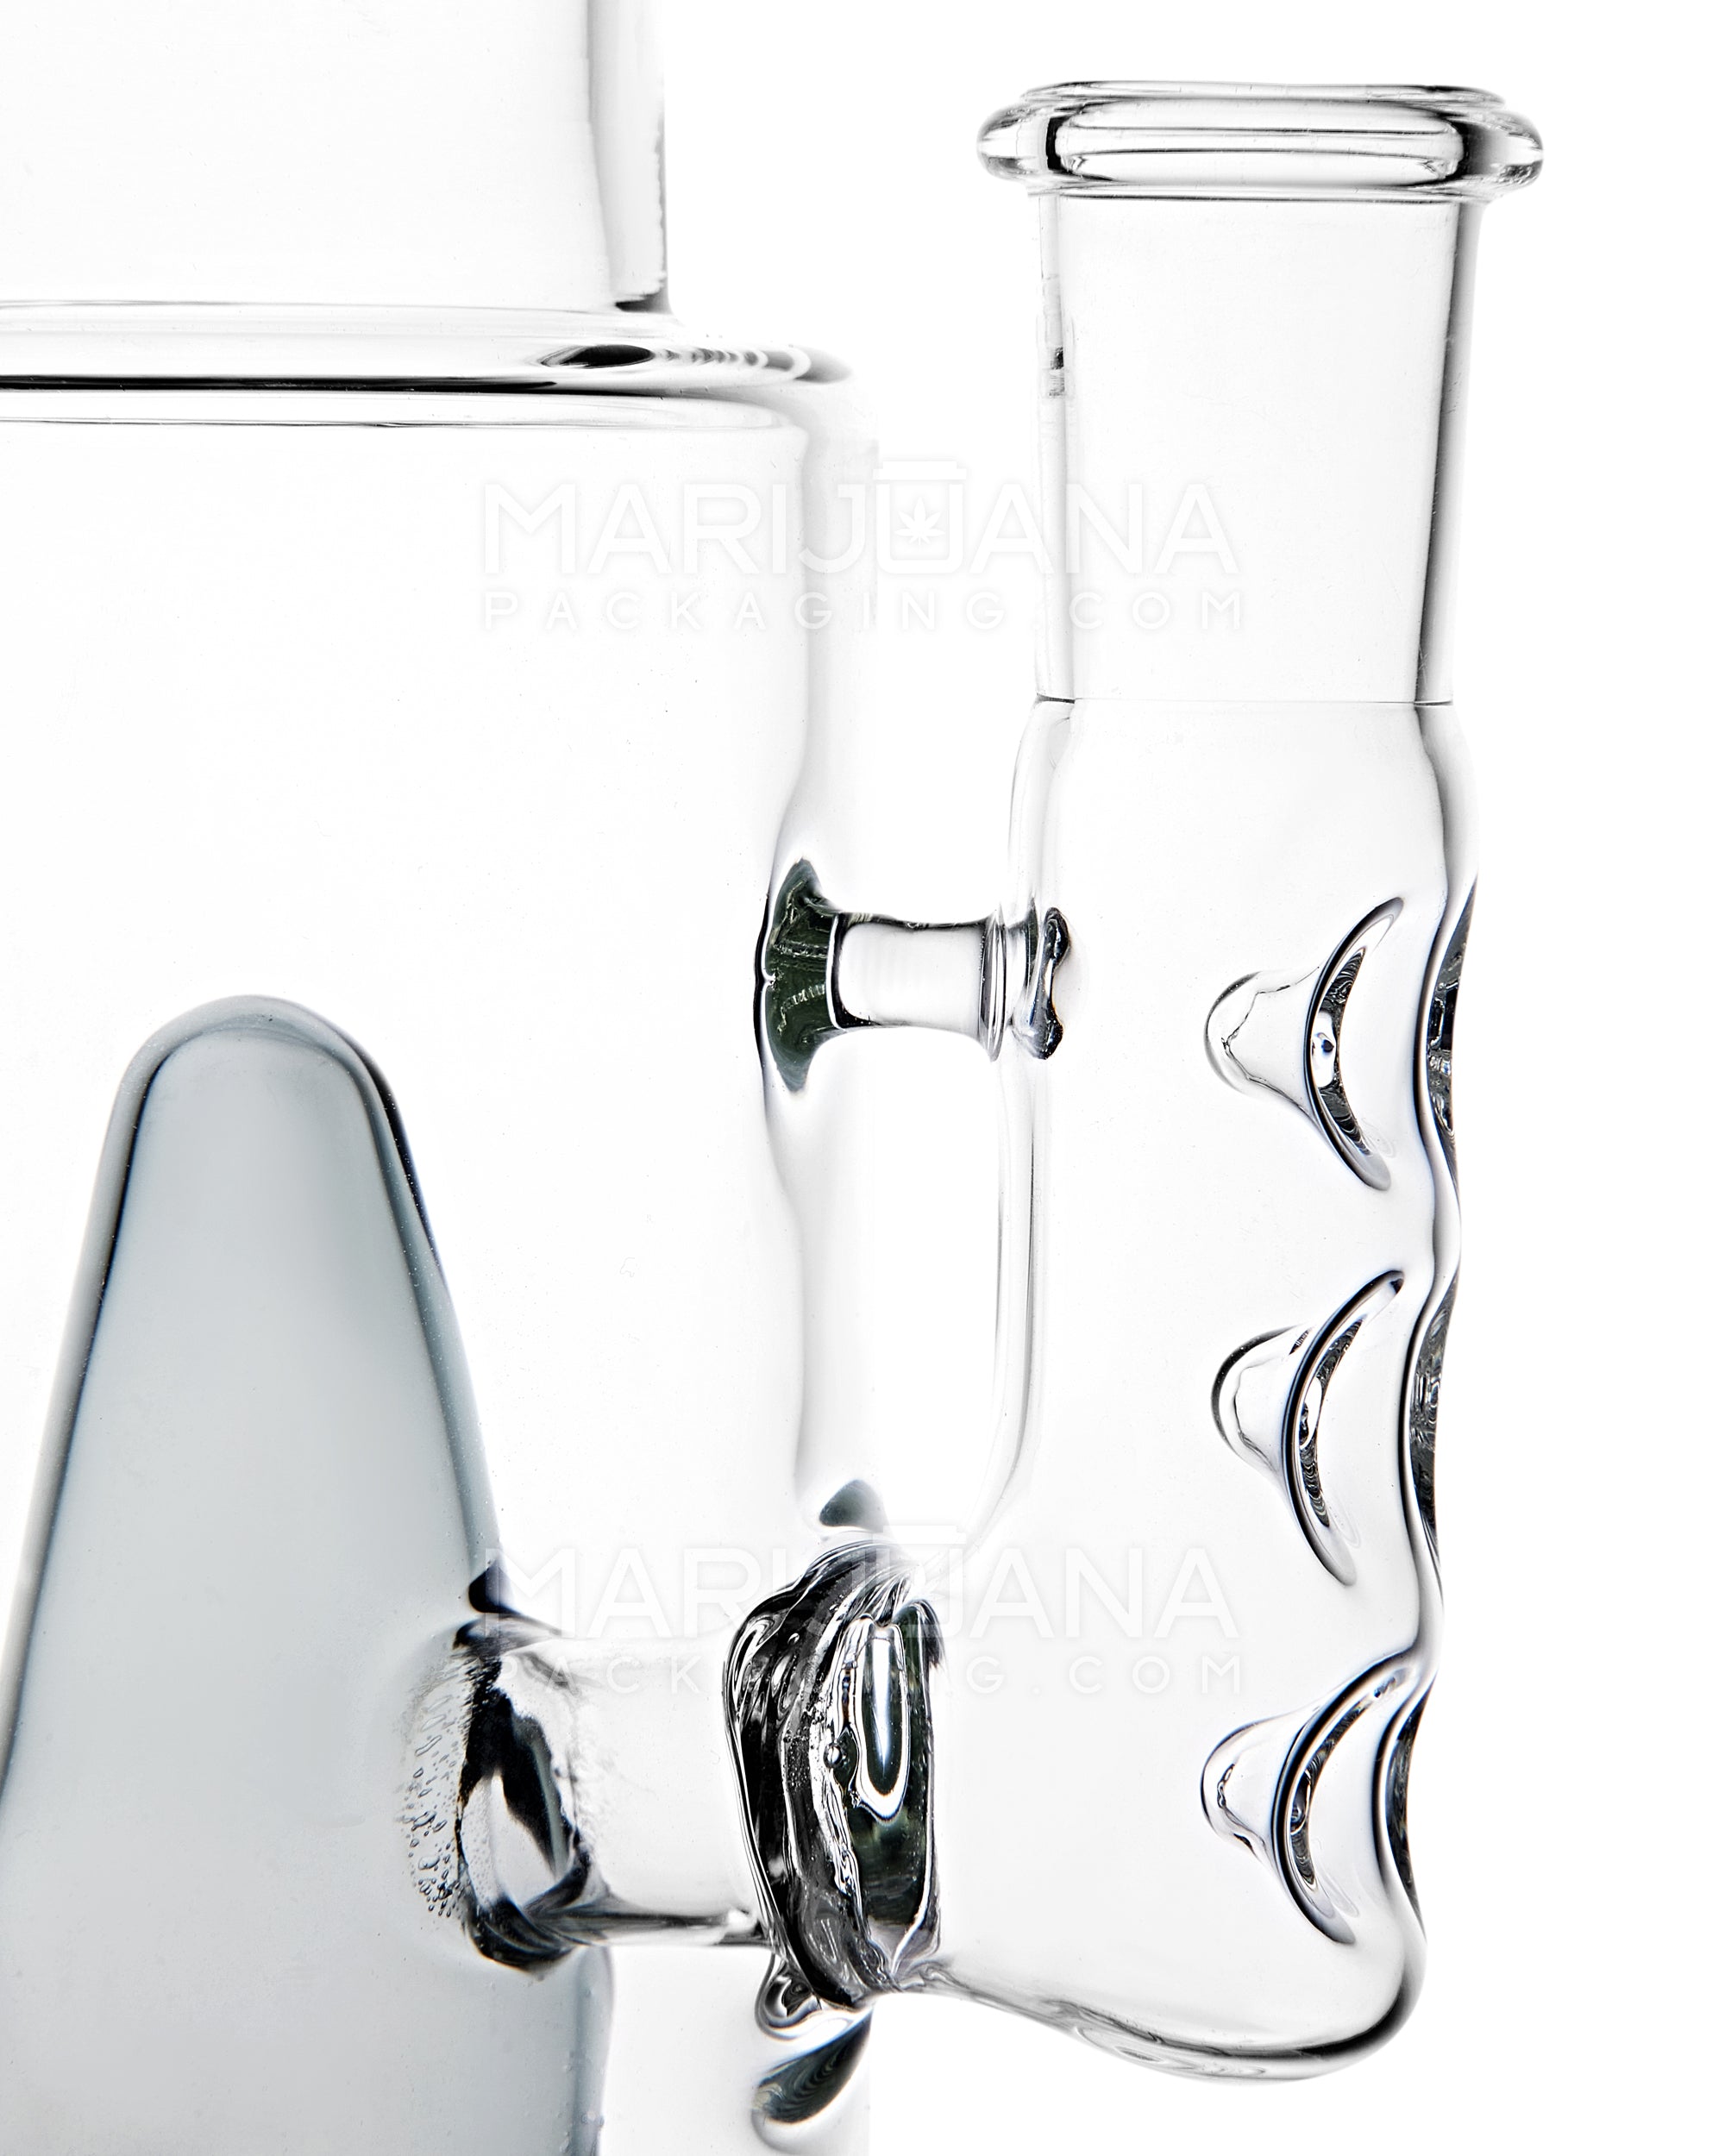 Straight Neck Showerhead Perc Glass Water Pipe w/ Ice Catcher & Thick Base | 15in Tall - 18mm Bowl - Black - 4